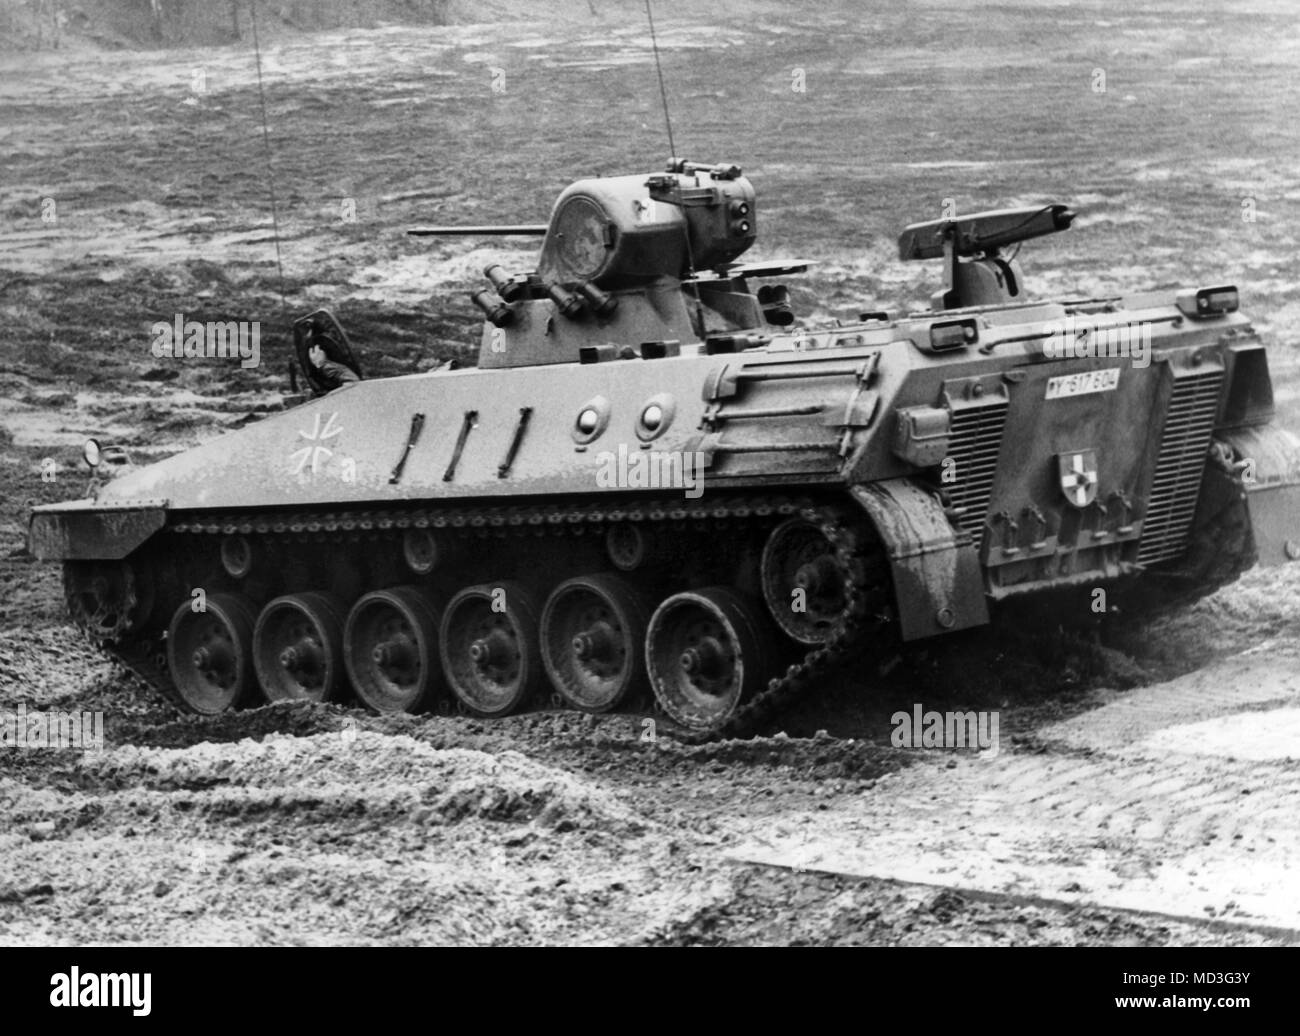 The new Schutzenpanzer Marder of the Bundeswehr will be presented to the public for the first time on 06.05.1969 at Munster. It was developed by the companies Rheinstahl Hanomag and Rheinstahl Hentschel with the help of 1,400 other companies and is characterized by its speed, agility and high firepower. Its 600 hp engine allows a speed of 75 kilometers per hour. It can accommodate a crew of ten with a length of 6.80 meters and a width of 3.20 meters. Photo: Lothar Heidtmann     (c) dpa - Report     | usage worldwide Stock Photo